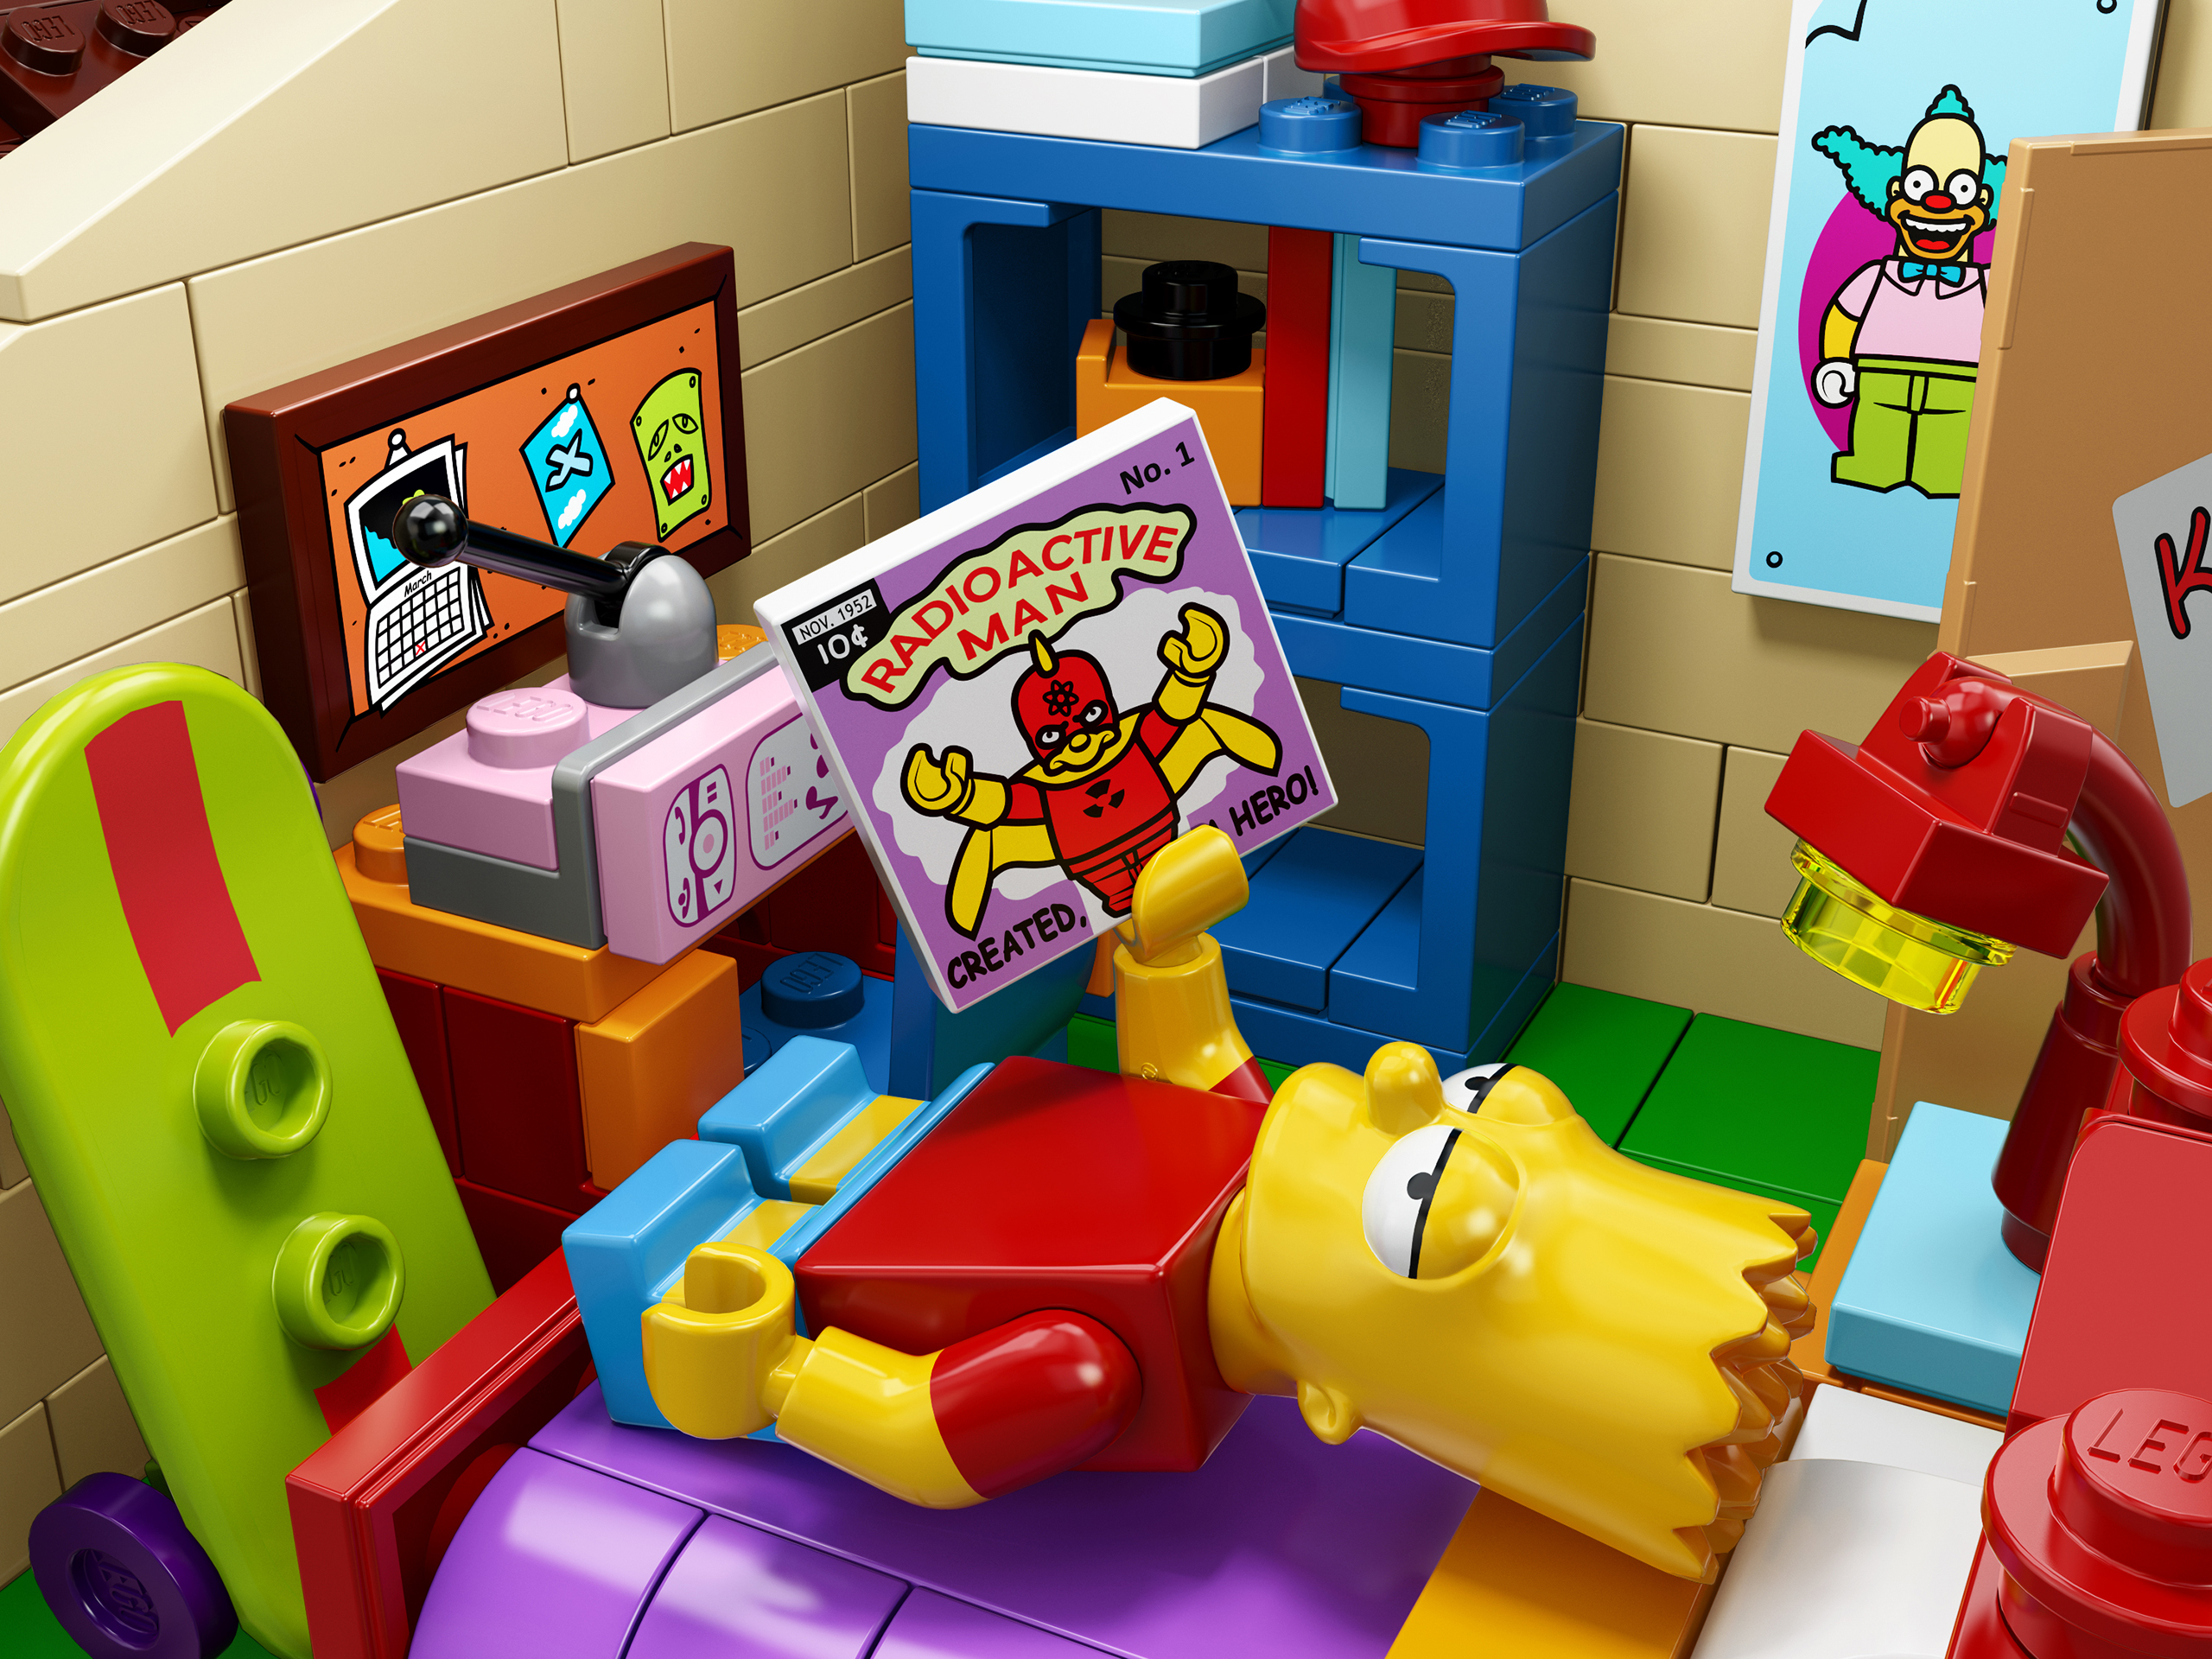 Weekly Wallpaper: Put Some LEGO People On Your Desktop